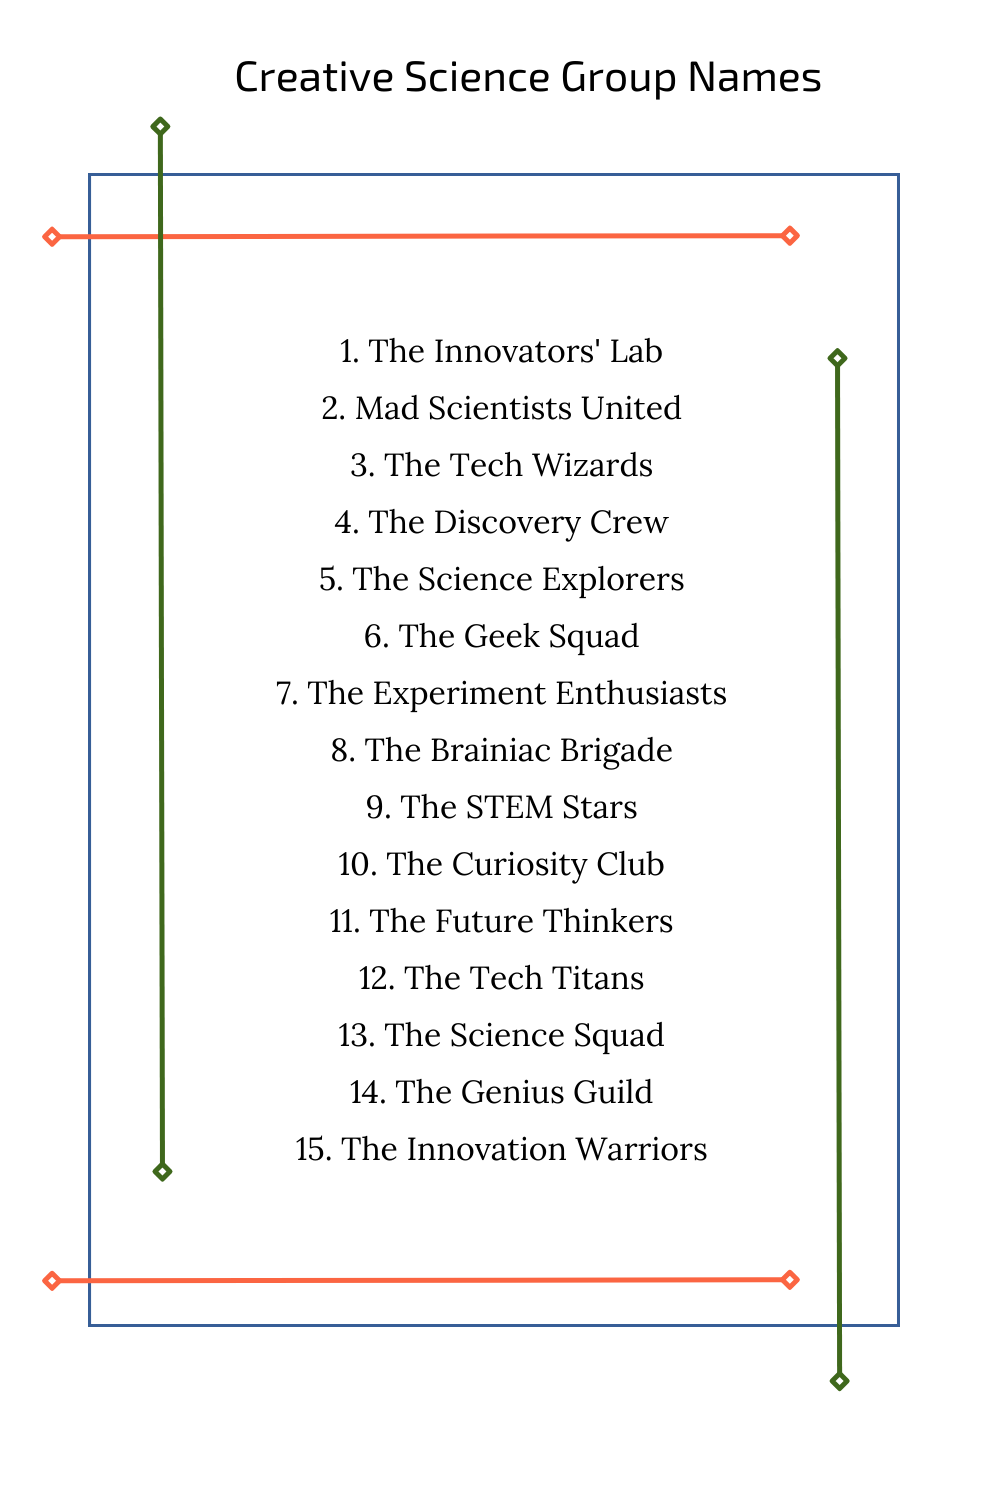 Creative Science Group Names